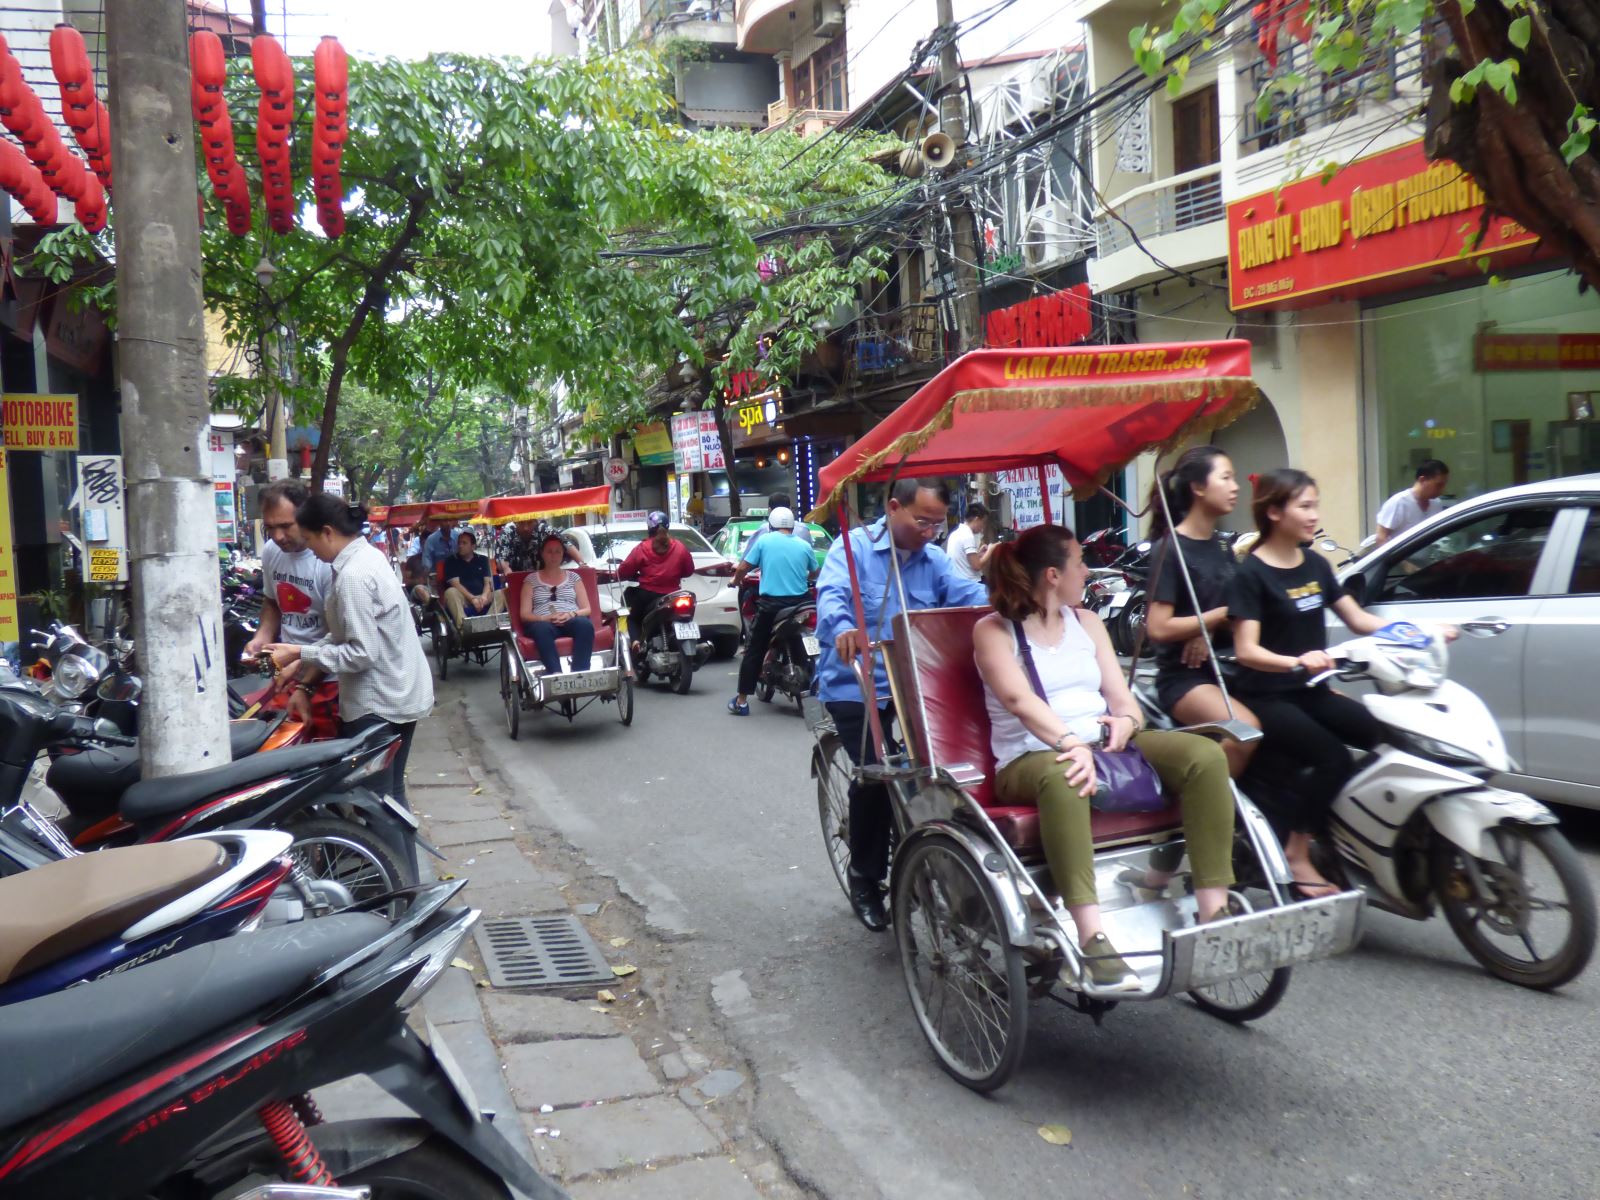 Cyclo in the street